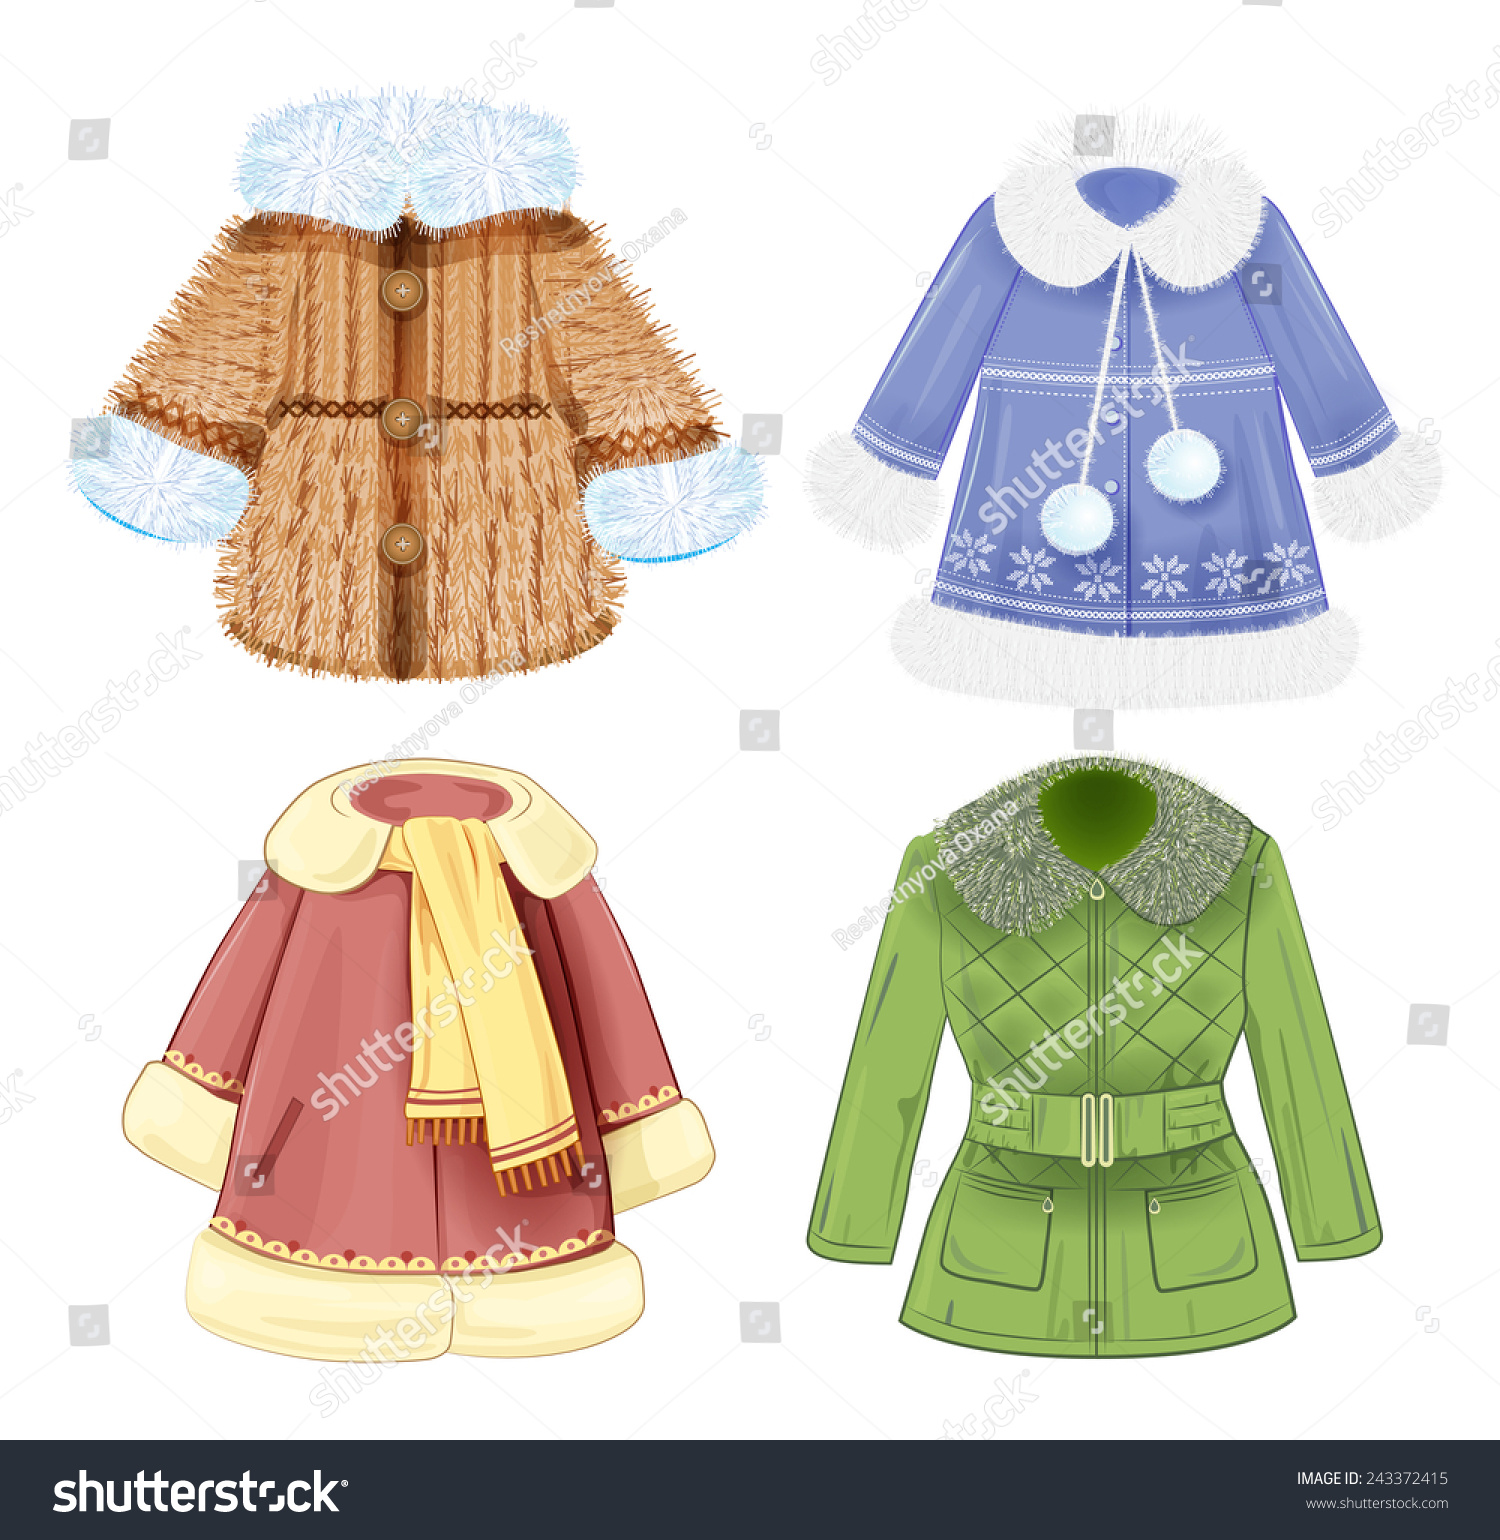 Set Of Winter Clothes For Children Stock Vector Illustration 243372415